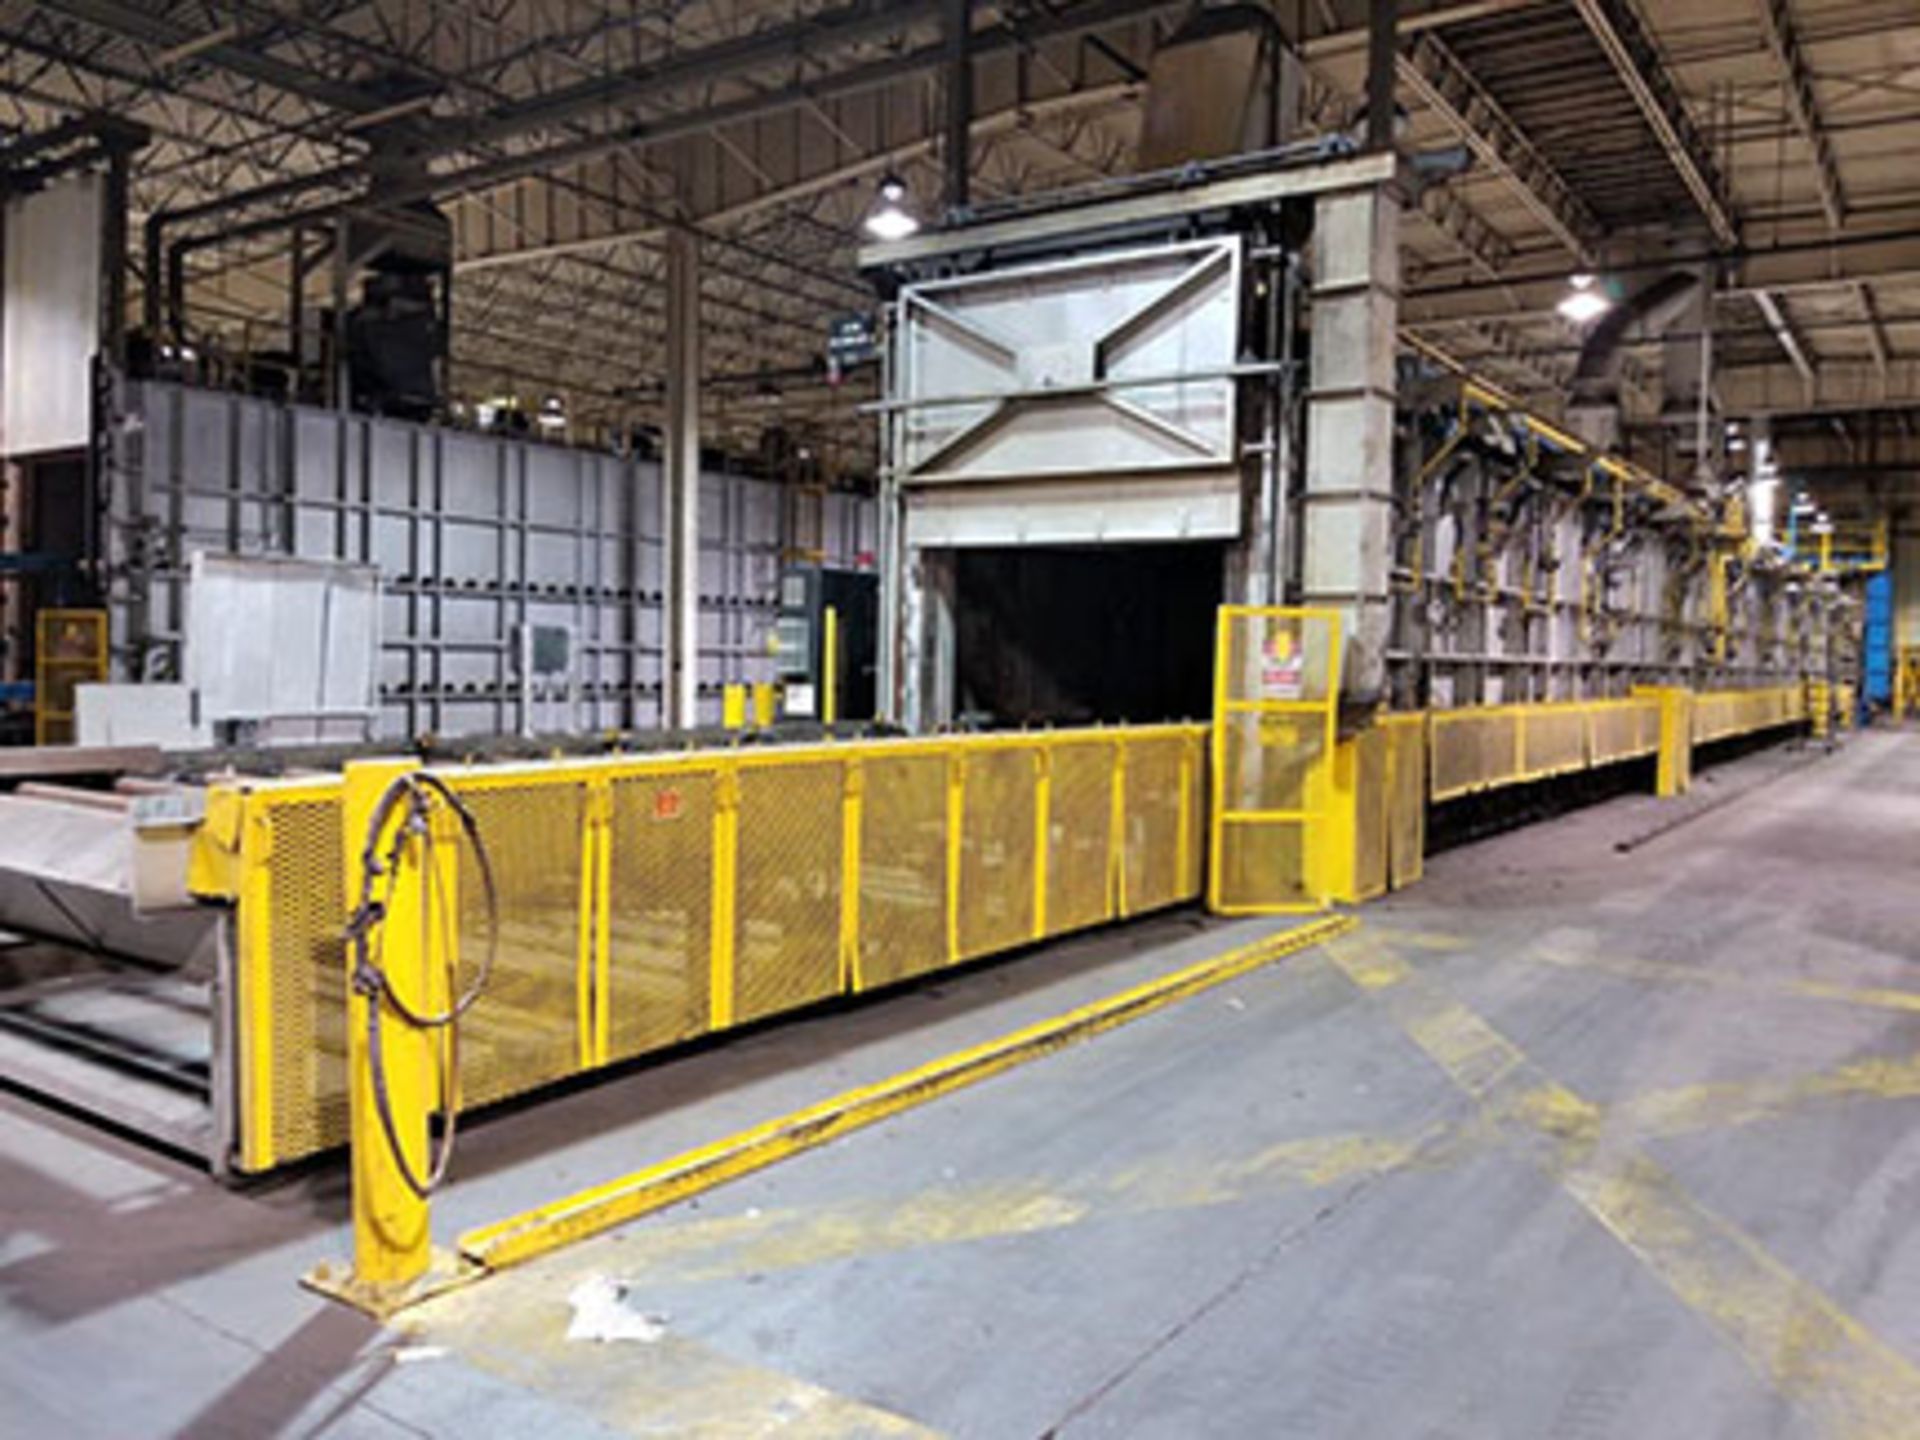 CONTINUOUS SQUEEZE CAST HEAT TREATING FURNACE 122'L X 90'' X 55'' TUNNEL, (2) TANKS, QUINCH/RISE